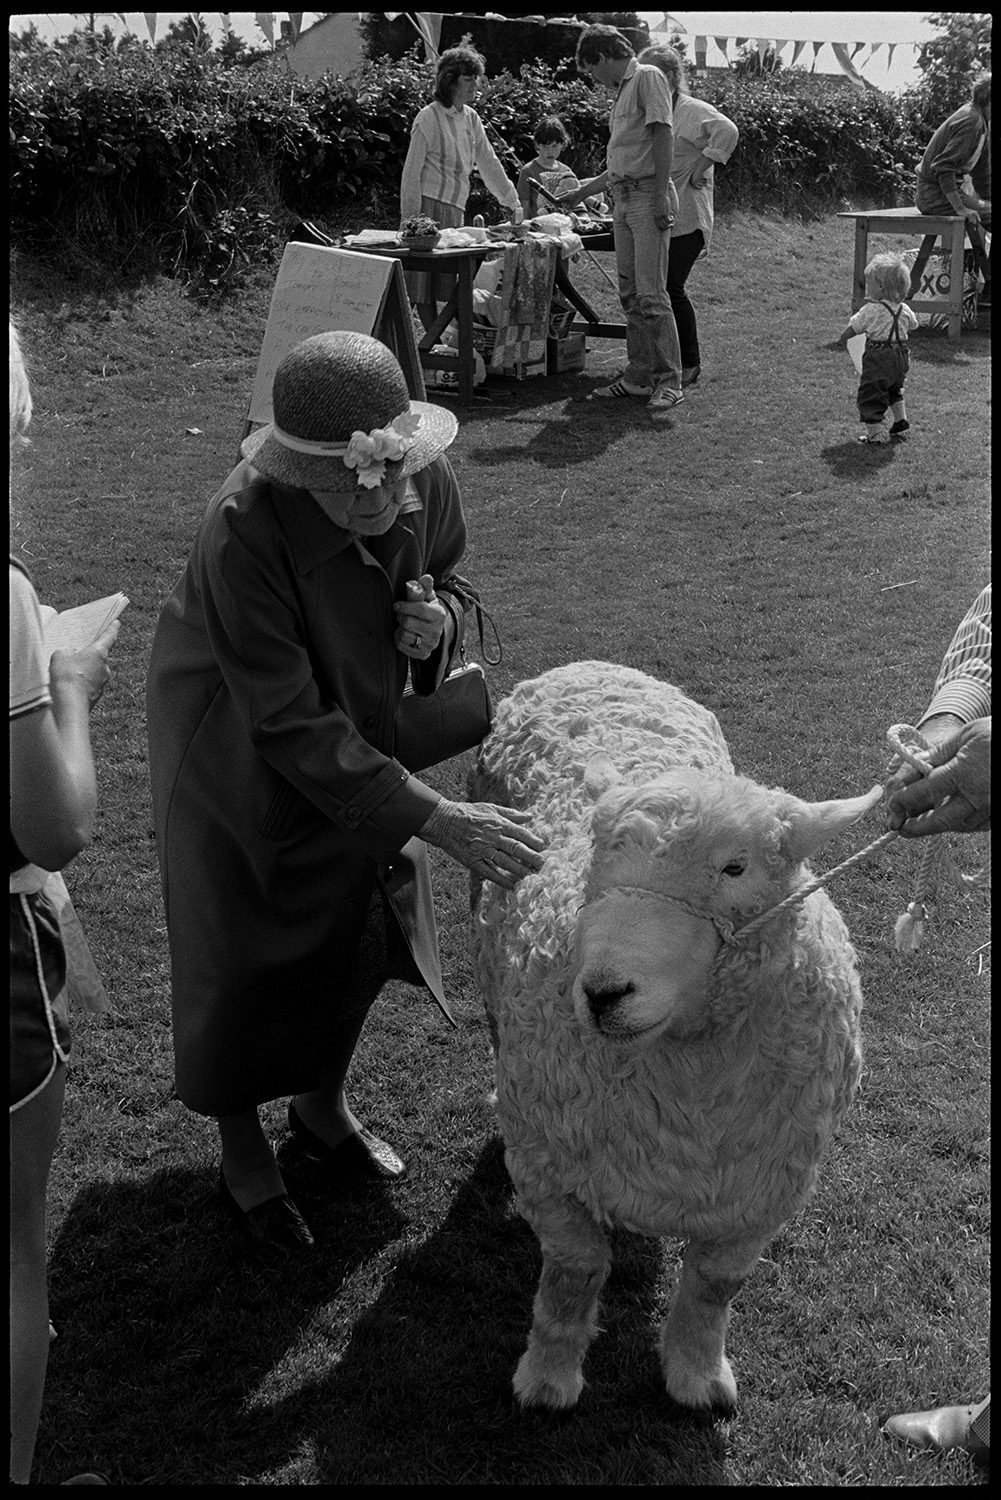 Village revel, fete, folk dance on green, stalls, jumble, guess weight of the Ram, fancy dress.
[An elderly woman with a straw hat  having a go at the 'guess the weight of the ram' competition at the Beaford Revel on the village green. The ram is being held on a holt. Stallholders, bunting and other visitors are visible in the background.]